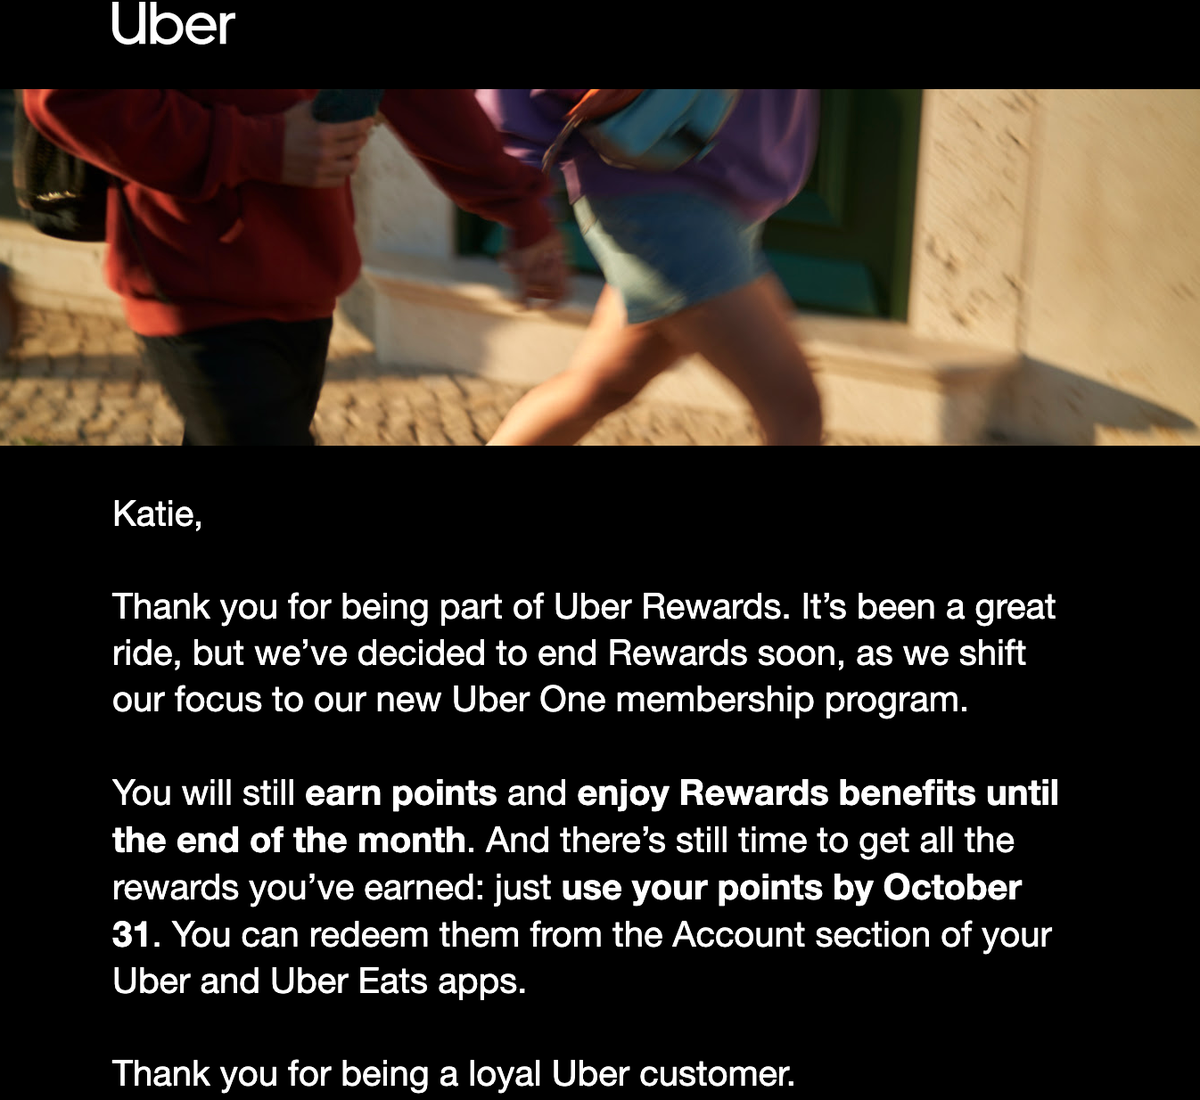 Email from Uber about Uber Rewards